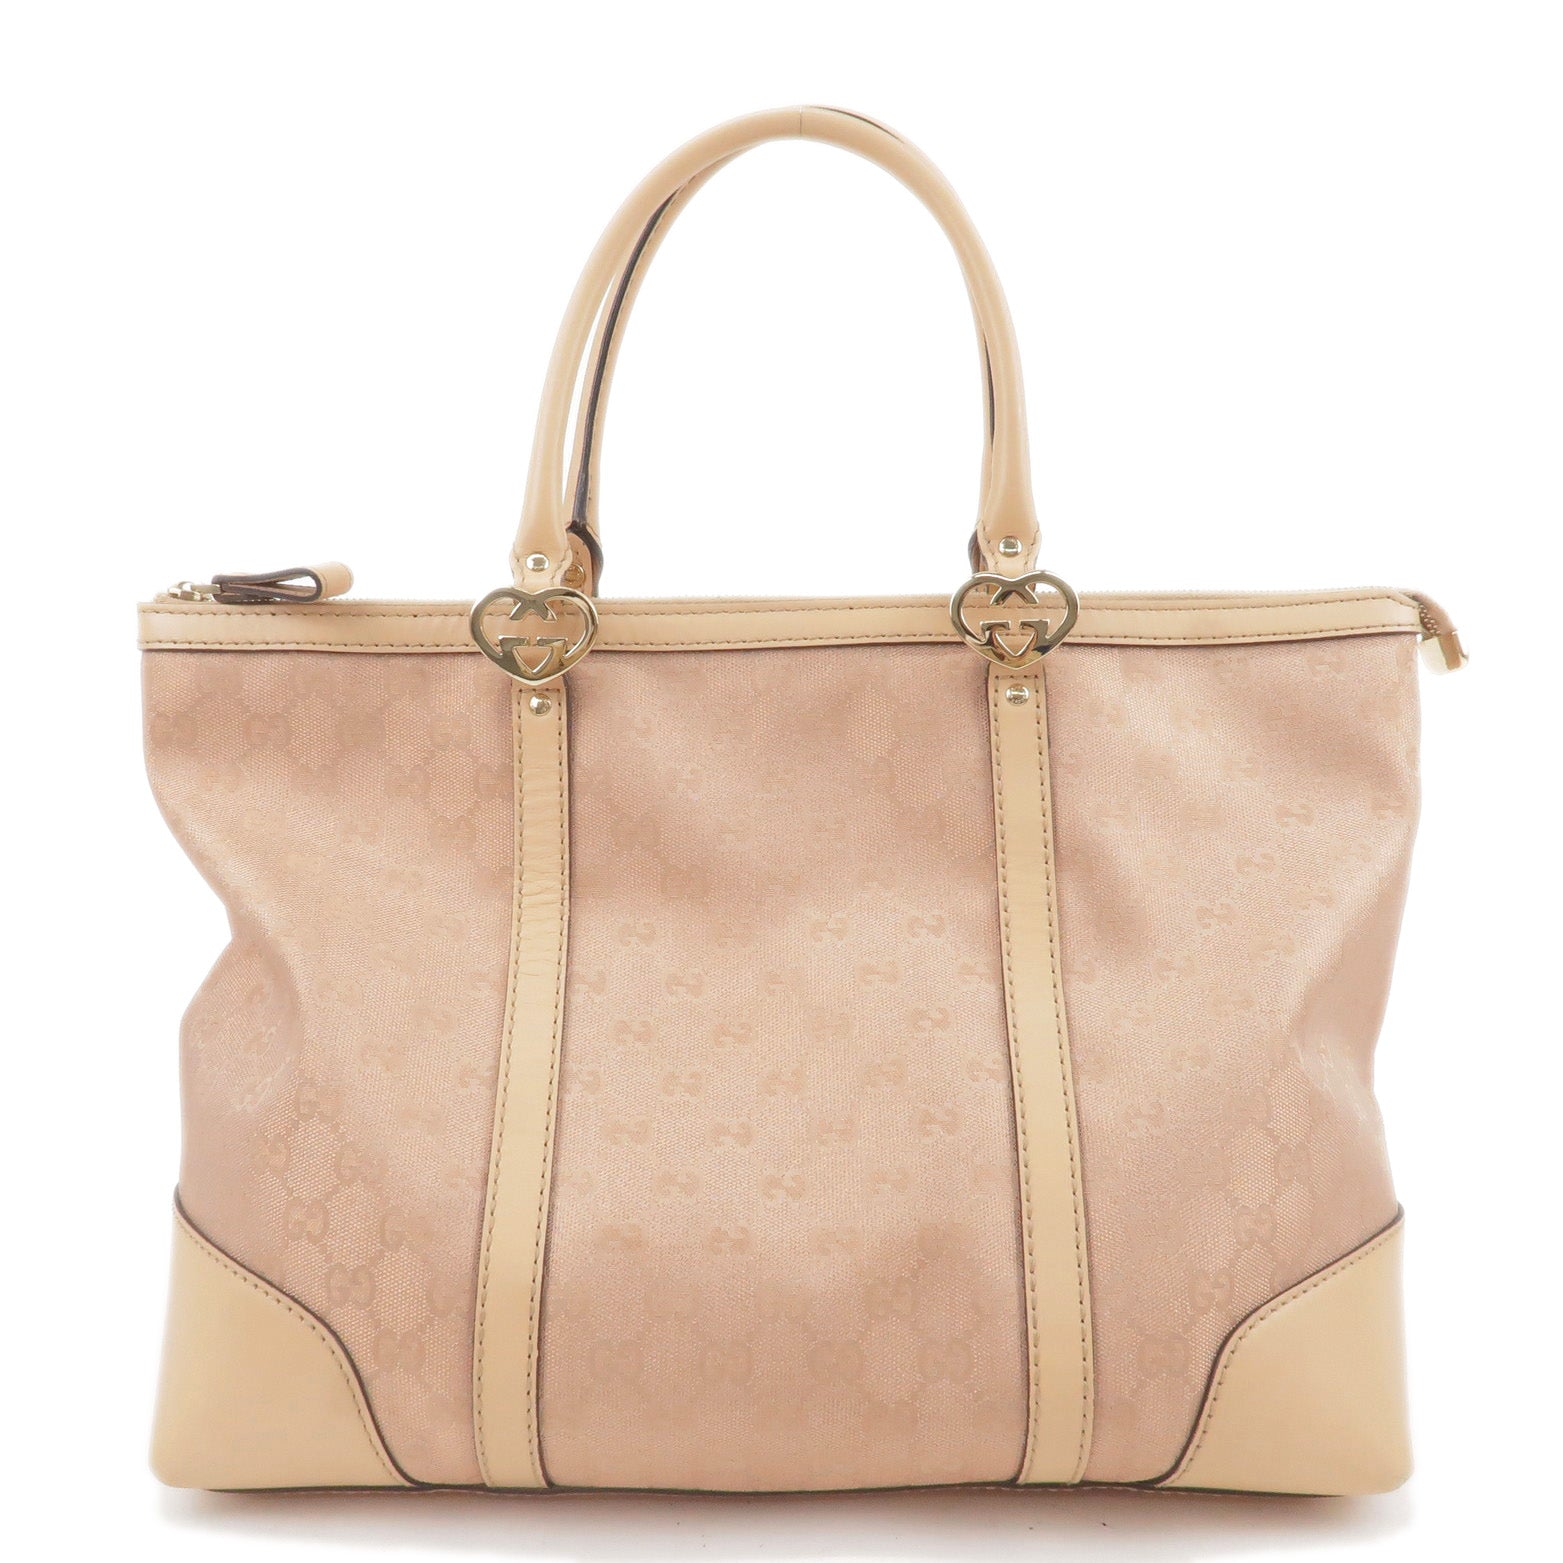 GUCCI-Lovely-GG-Canvas-Leather-Tote-Bag-Pink-Beige-257068